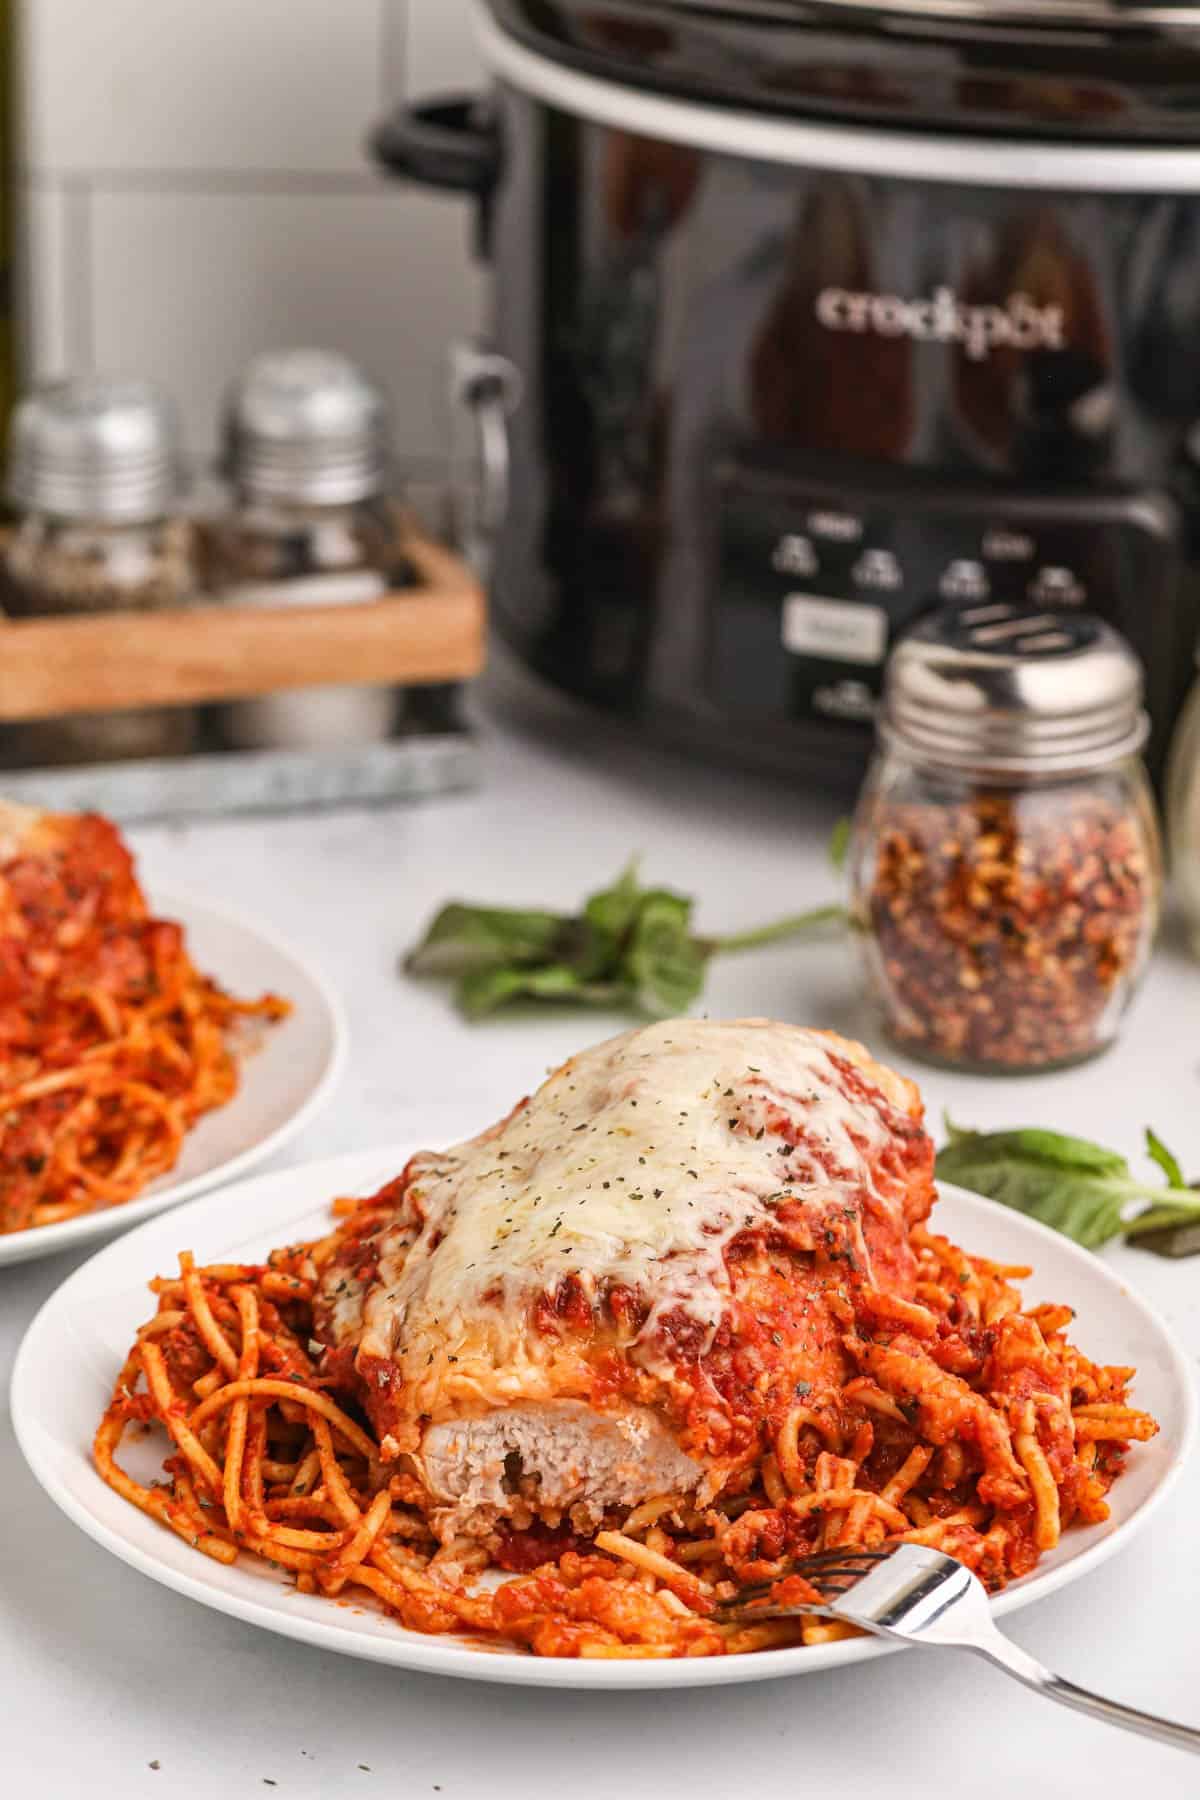 Chicken Parmesan made in the slow cooker on a plate in front of spices and a crock pot.